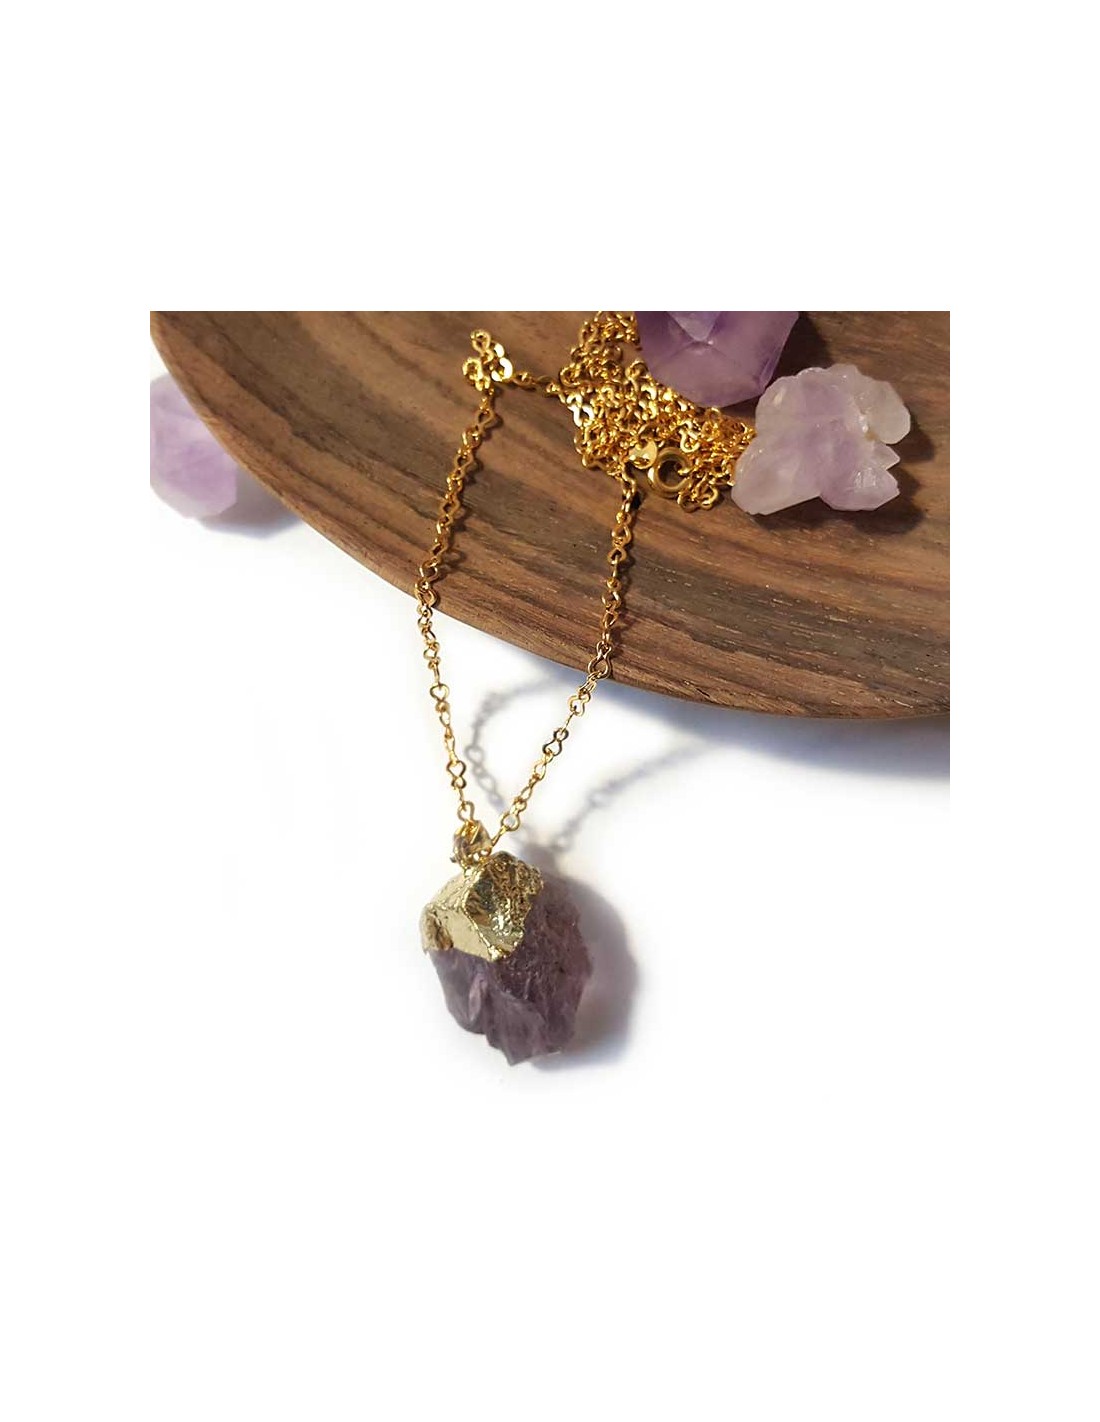 Yellow Gold Tone Natural Healing Crystal Purple Amethyst Rough Stone Pendant Necklace 